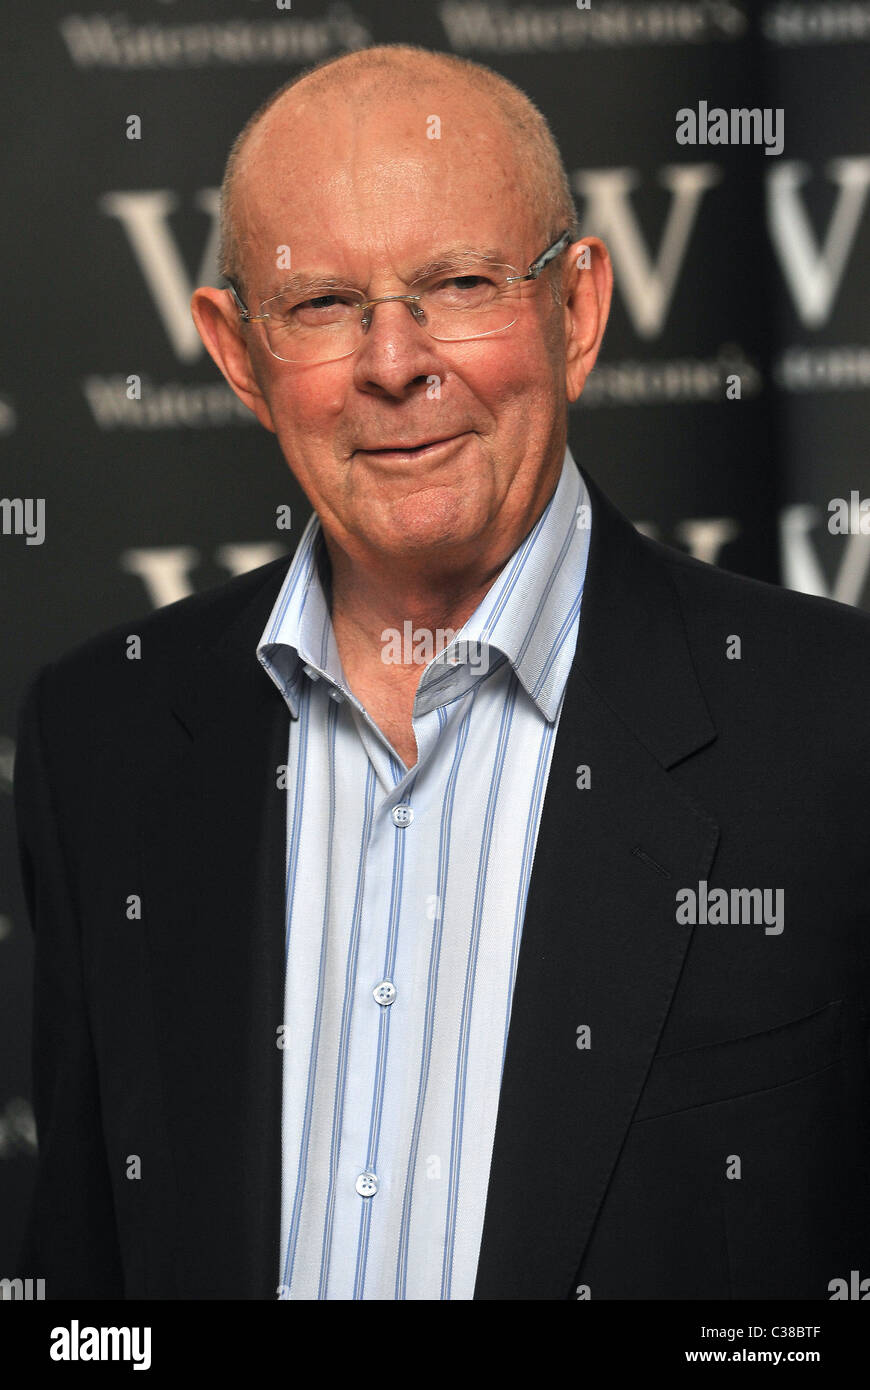 Wilbur Smith Book signing of 'Assegai' held at Waterstone's Piccadilly London, England - 06.04.09 : Stock Photo